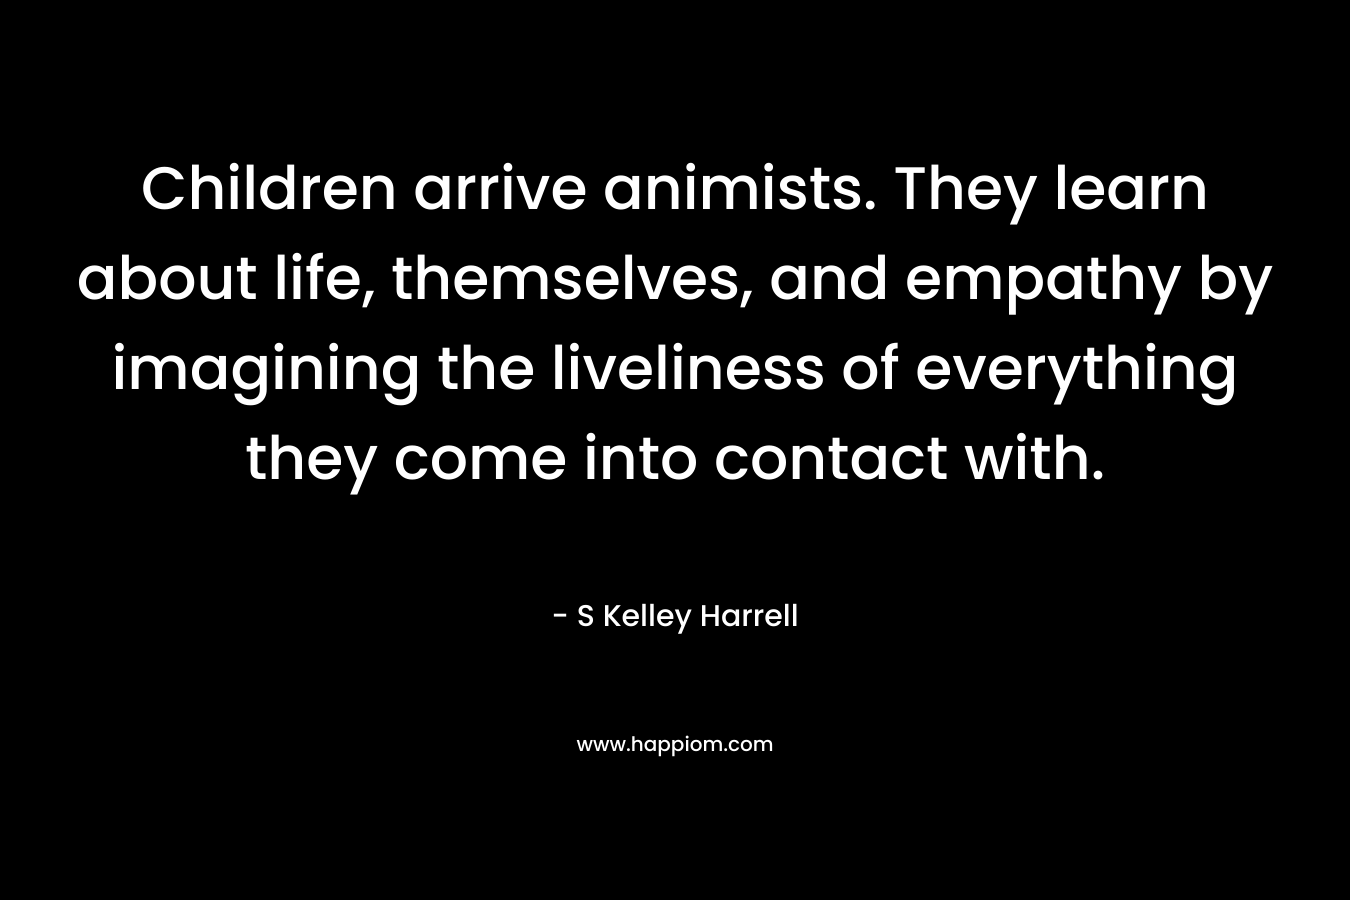 Children arrive animists. They learn about life, themselves, and empathy by imagining the liveliness of everything they come into contact with. – S Kelley Harrell